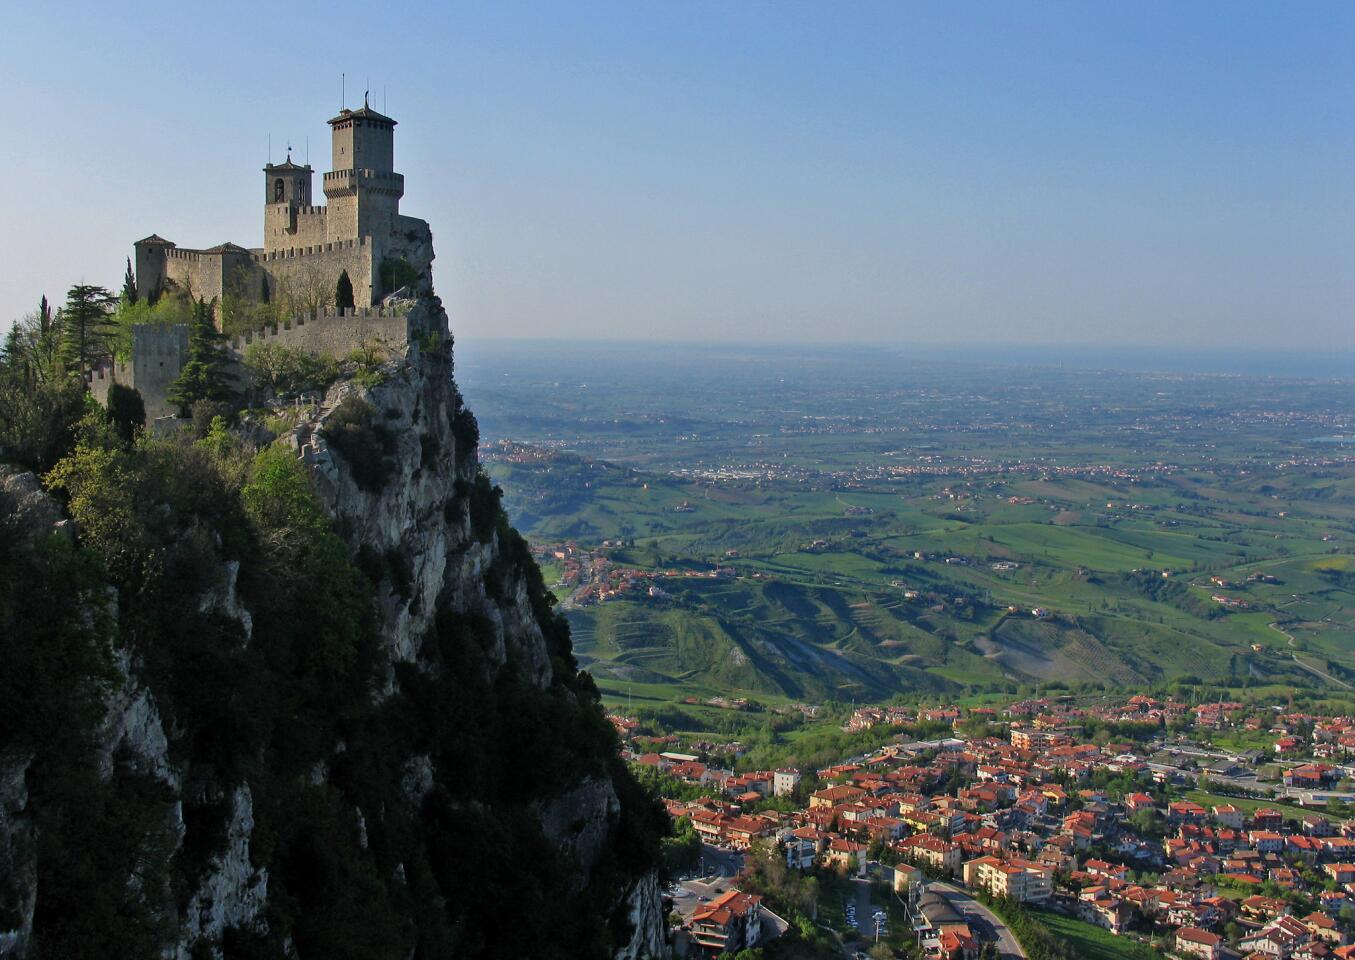 "Go slow. There isn't a lot to see," an attendant at a tourist information office told me when I drove into the Most Serene Republic of San Marino. Her candor was, I soon discovered, just one aspect of the wee country's singularity. -- Susan Spano